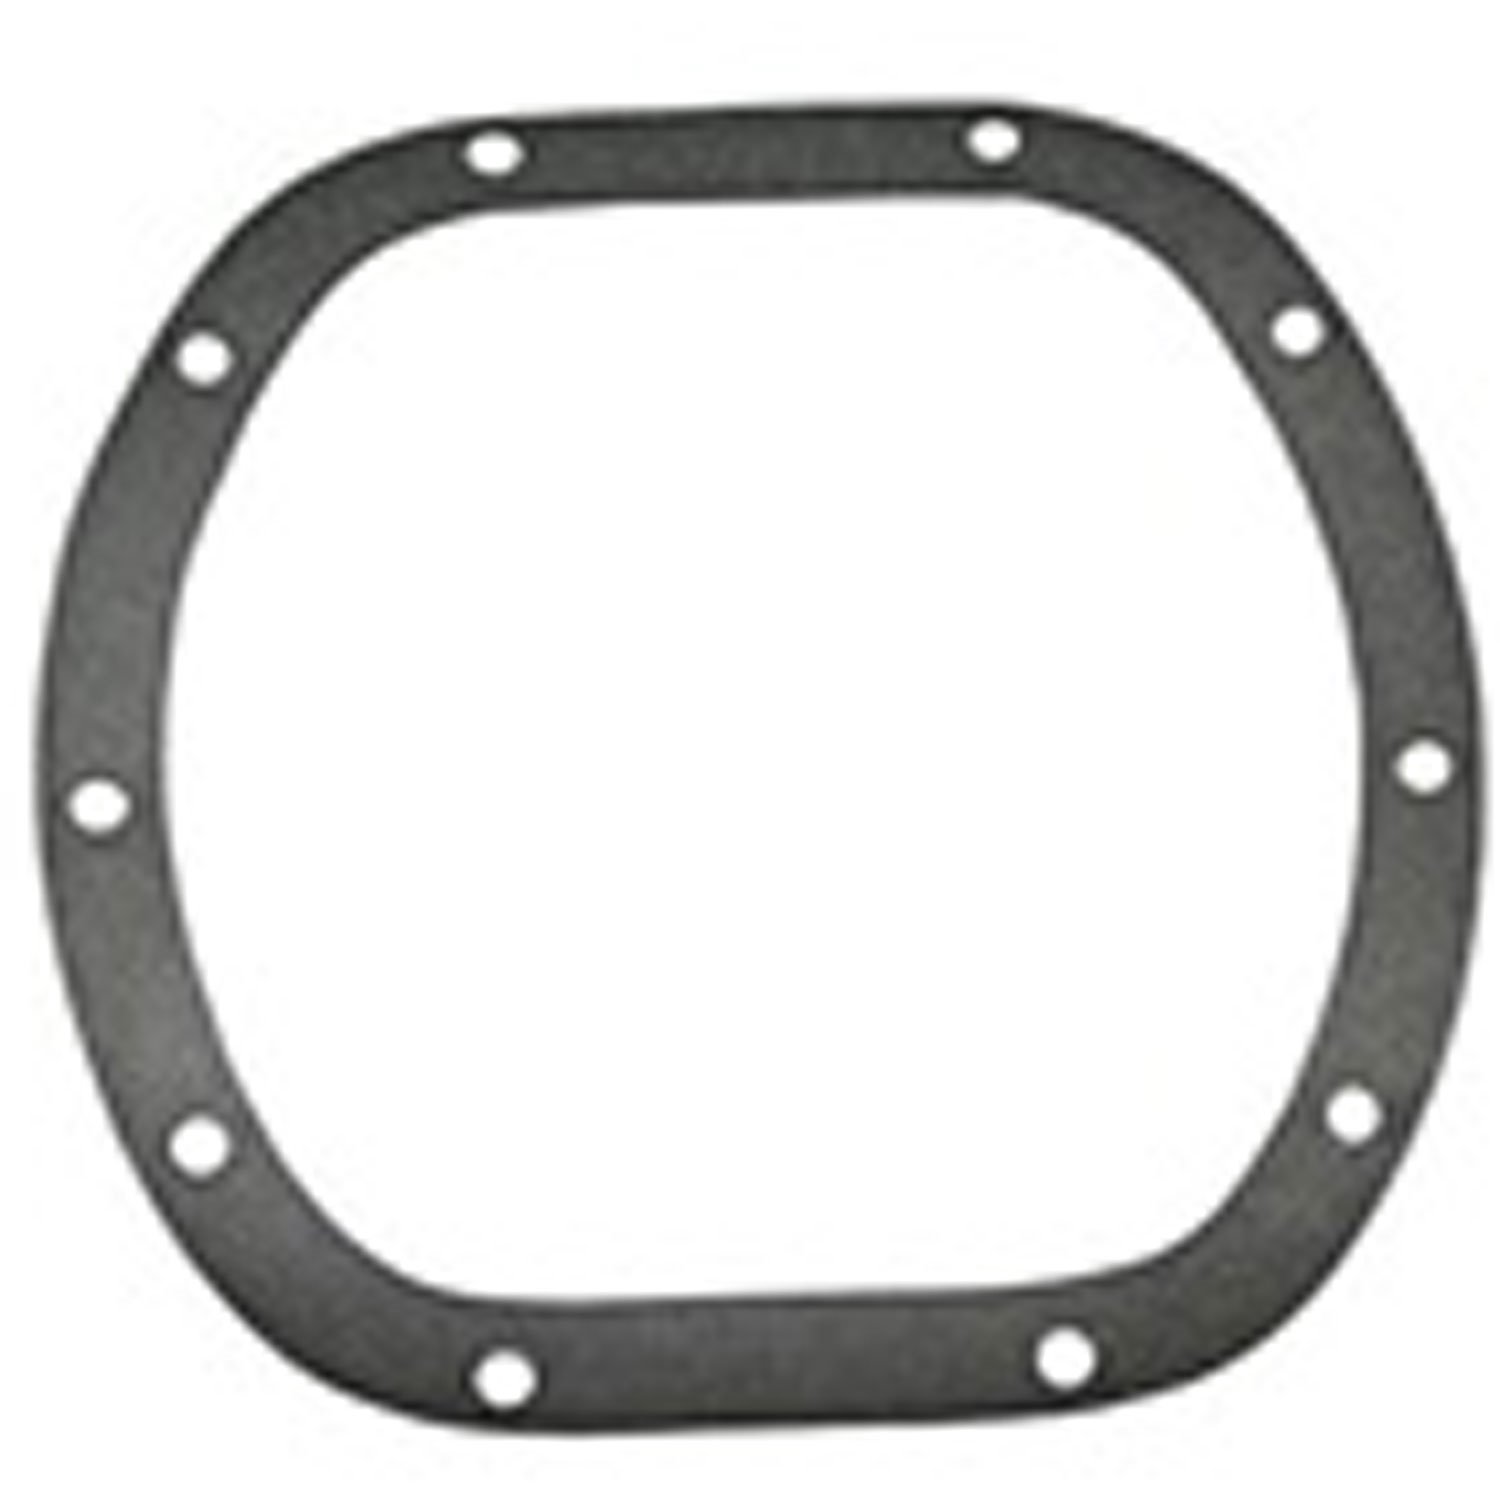 Differential Cover Gasket for Dana 25, 27 and 30 Front Axles